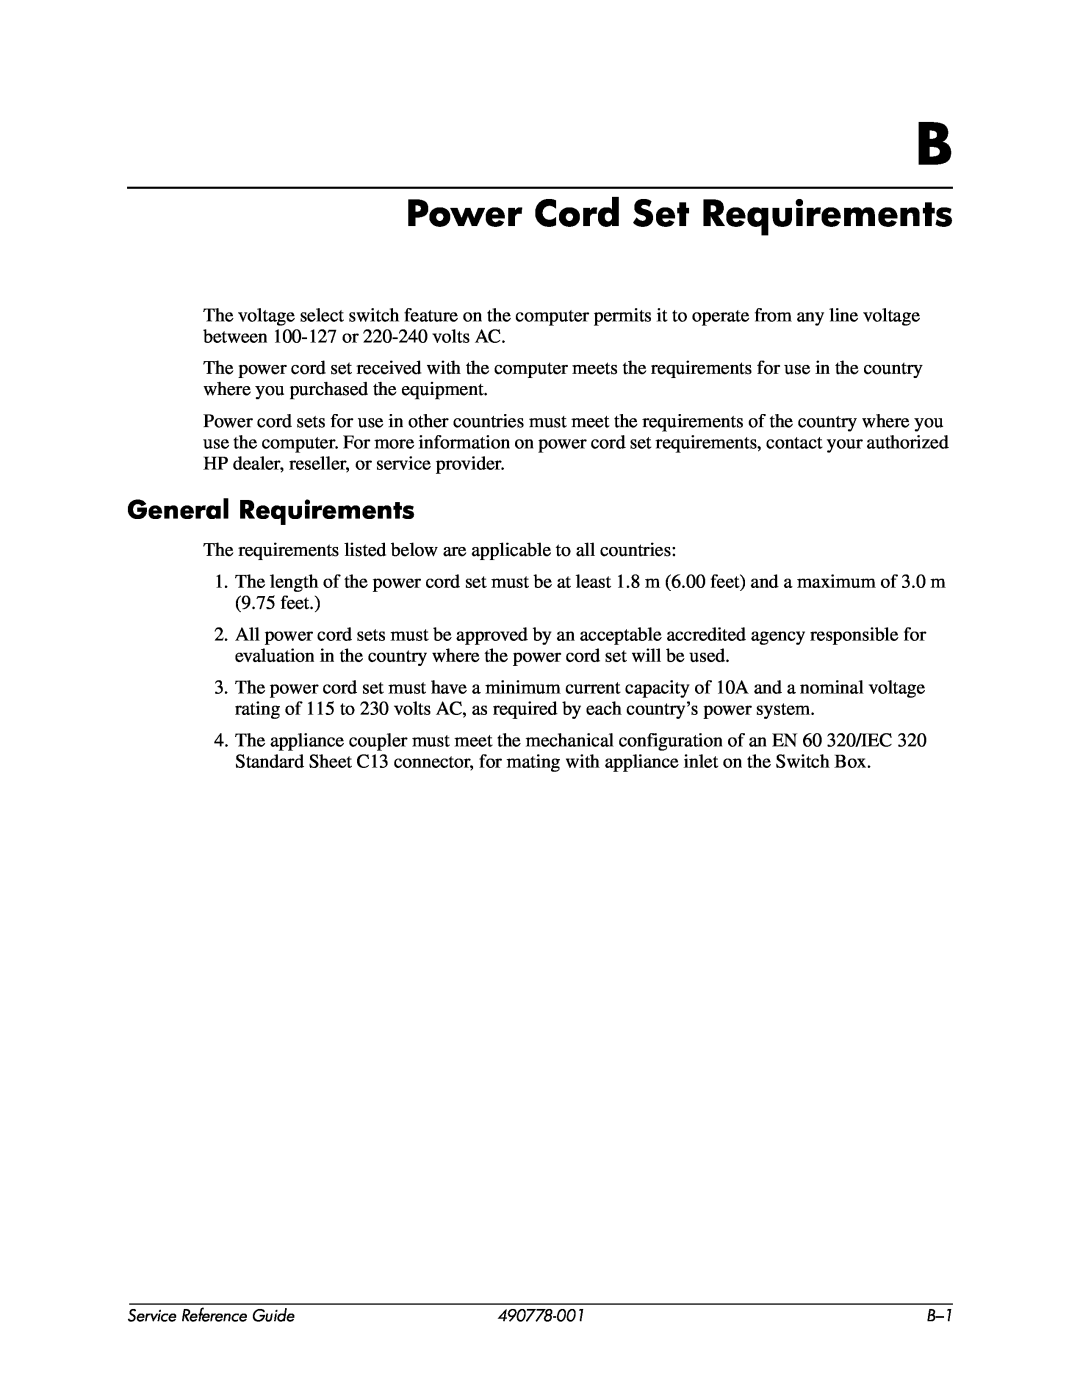 HP dx2310 manual Power Cord Set Requirements, General Requirements 